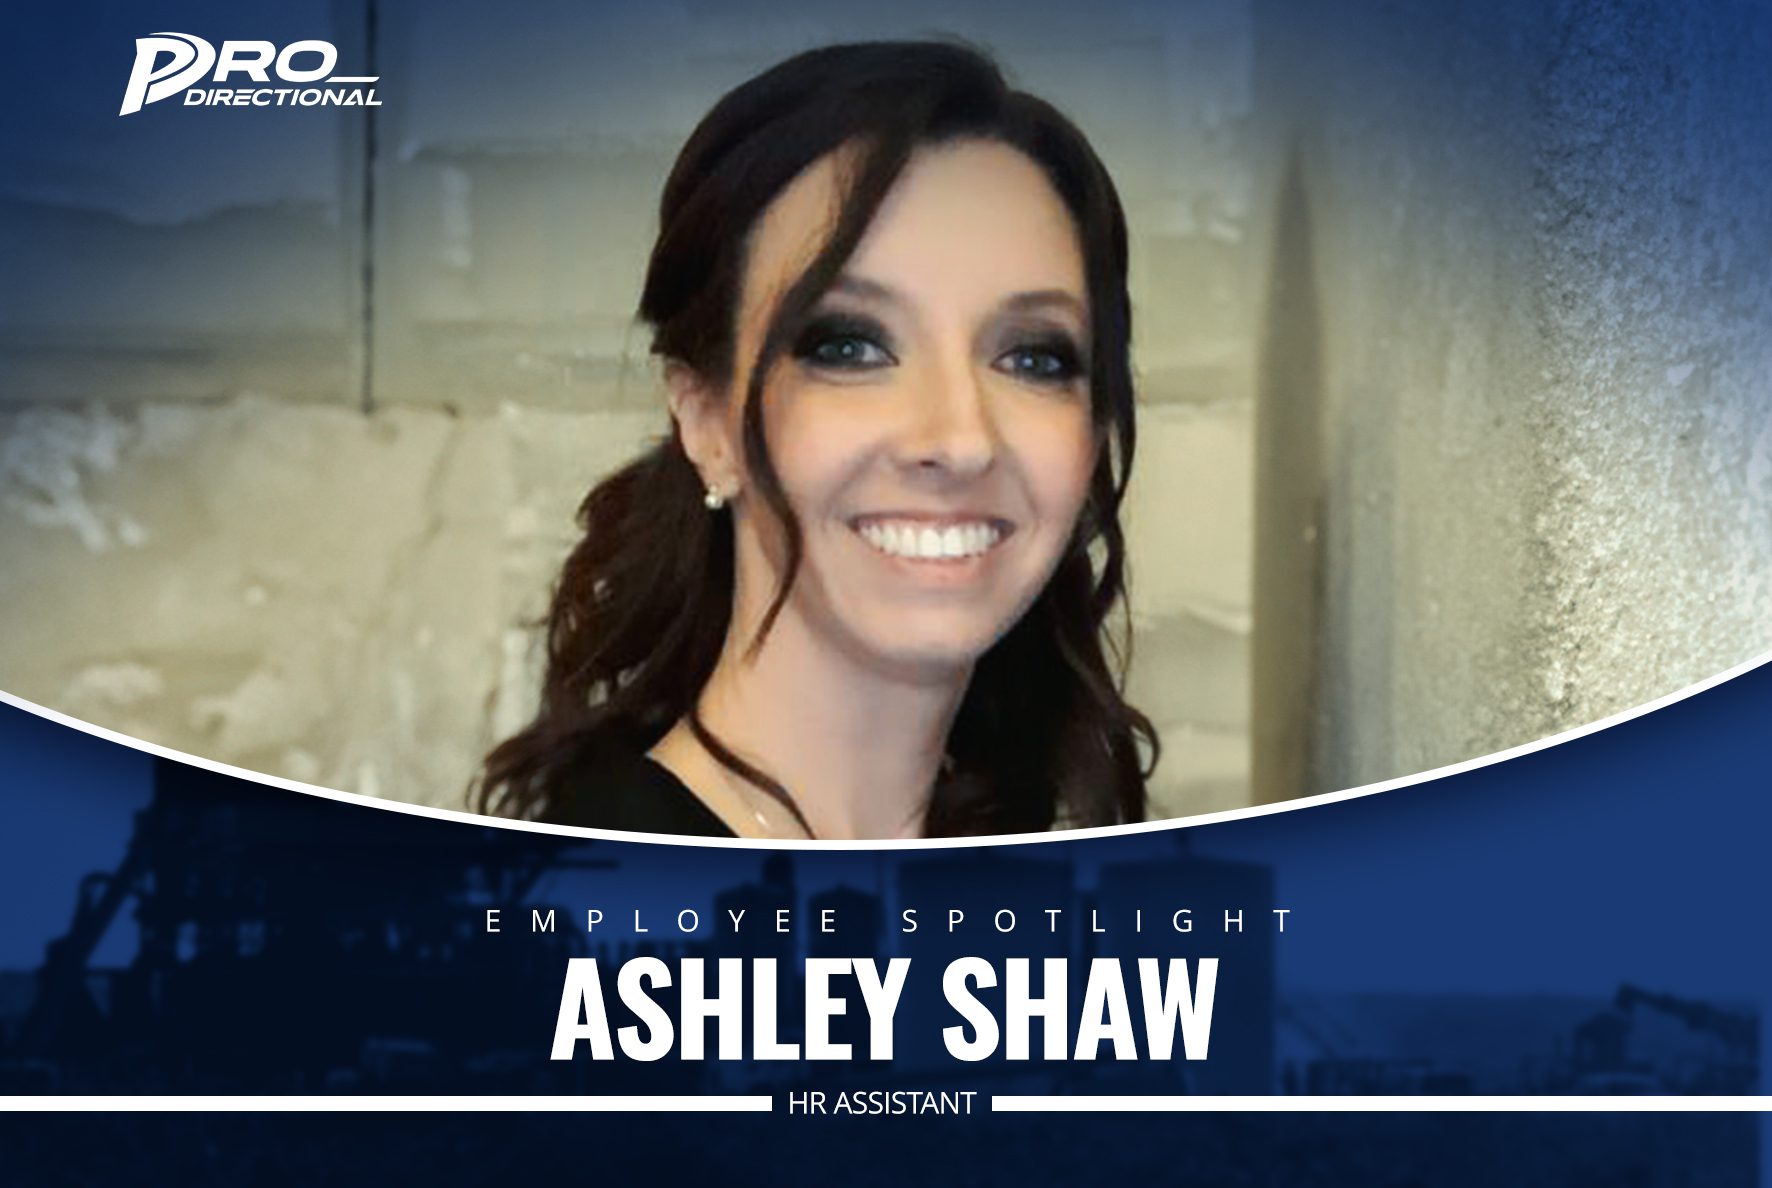 Featured Image for “Employee Spotlight: Ashley Shaw”